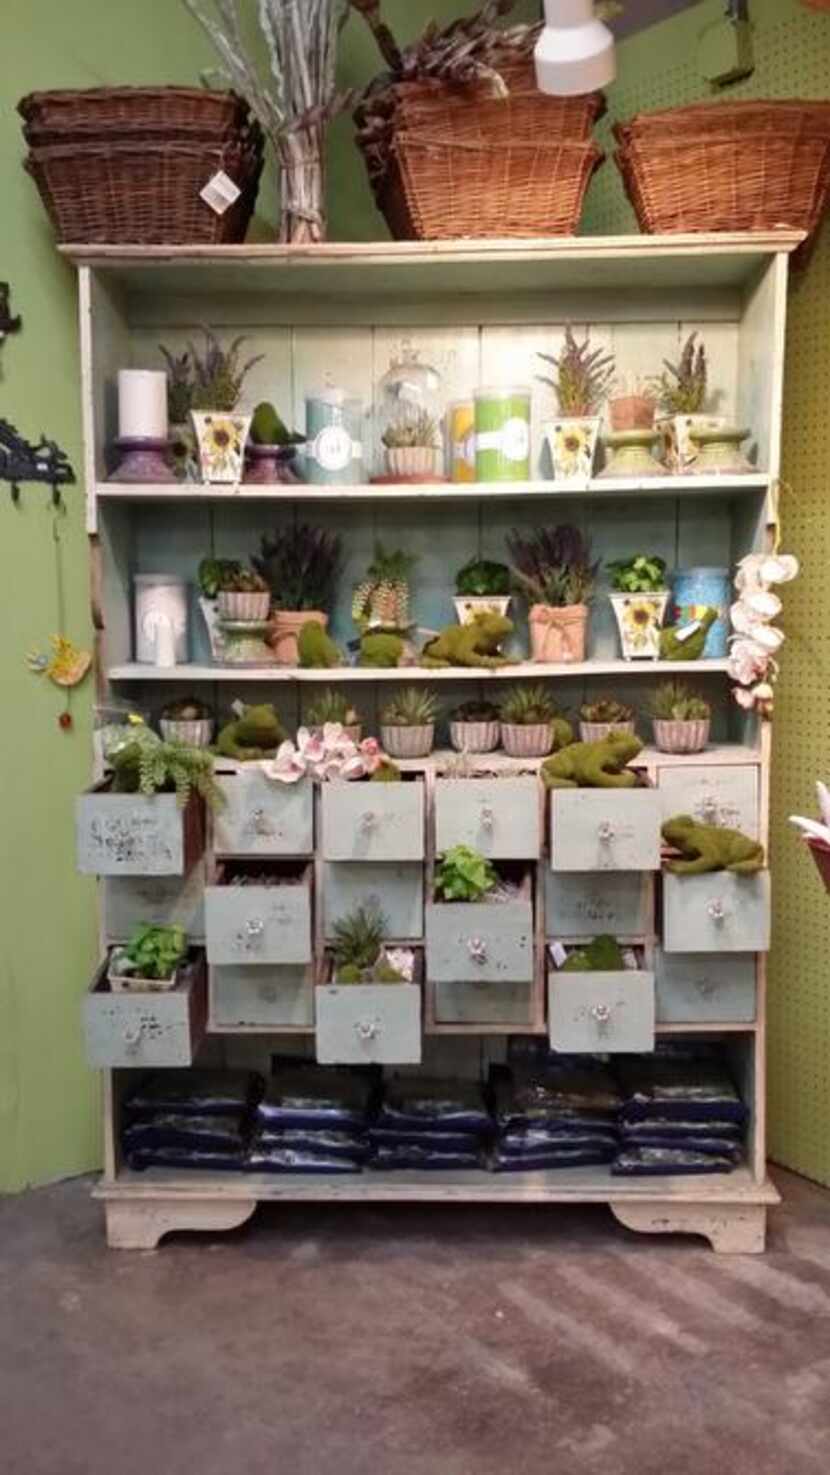 
Colorful cabinets and seaside-inspired shelves at the multilevel garden shop Tom's Thumb in...